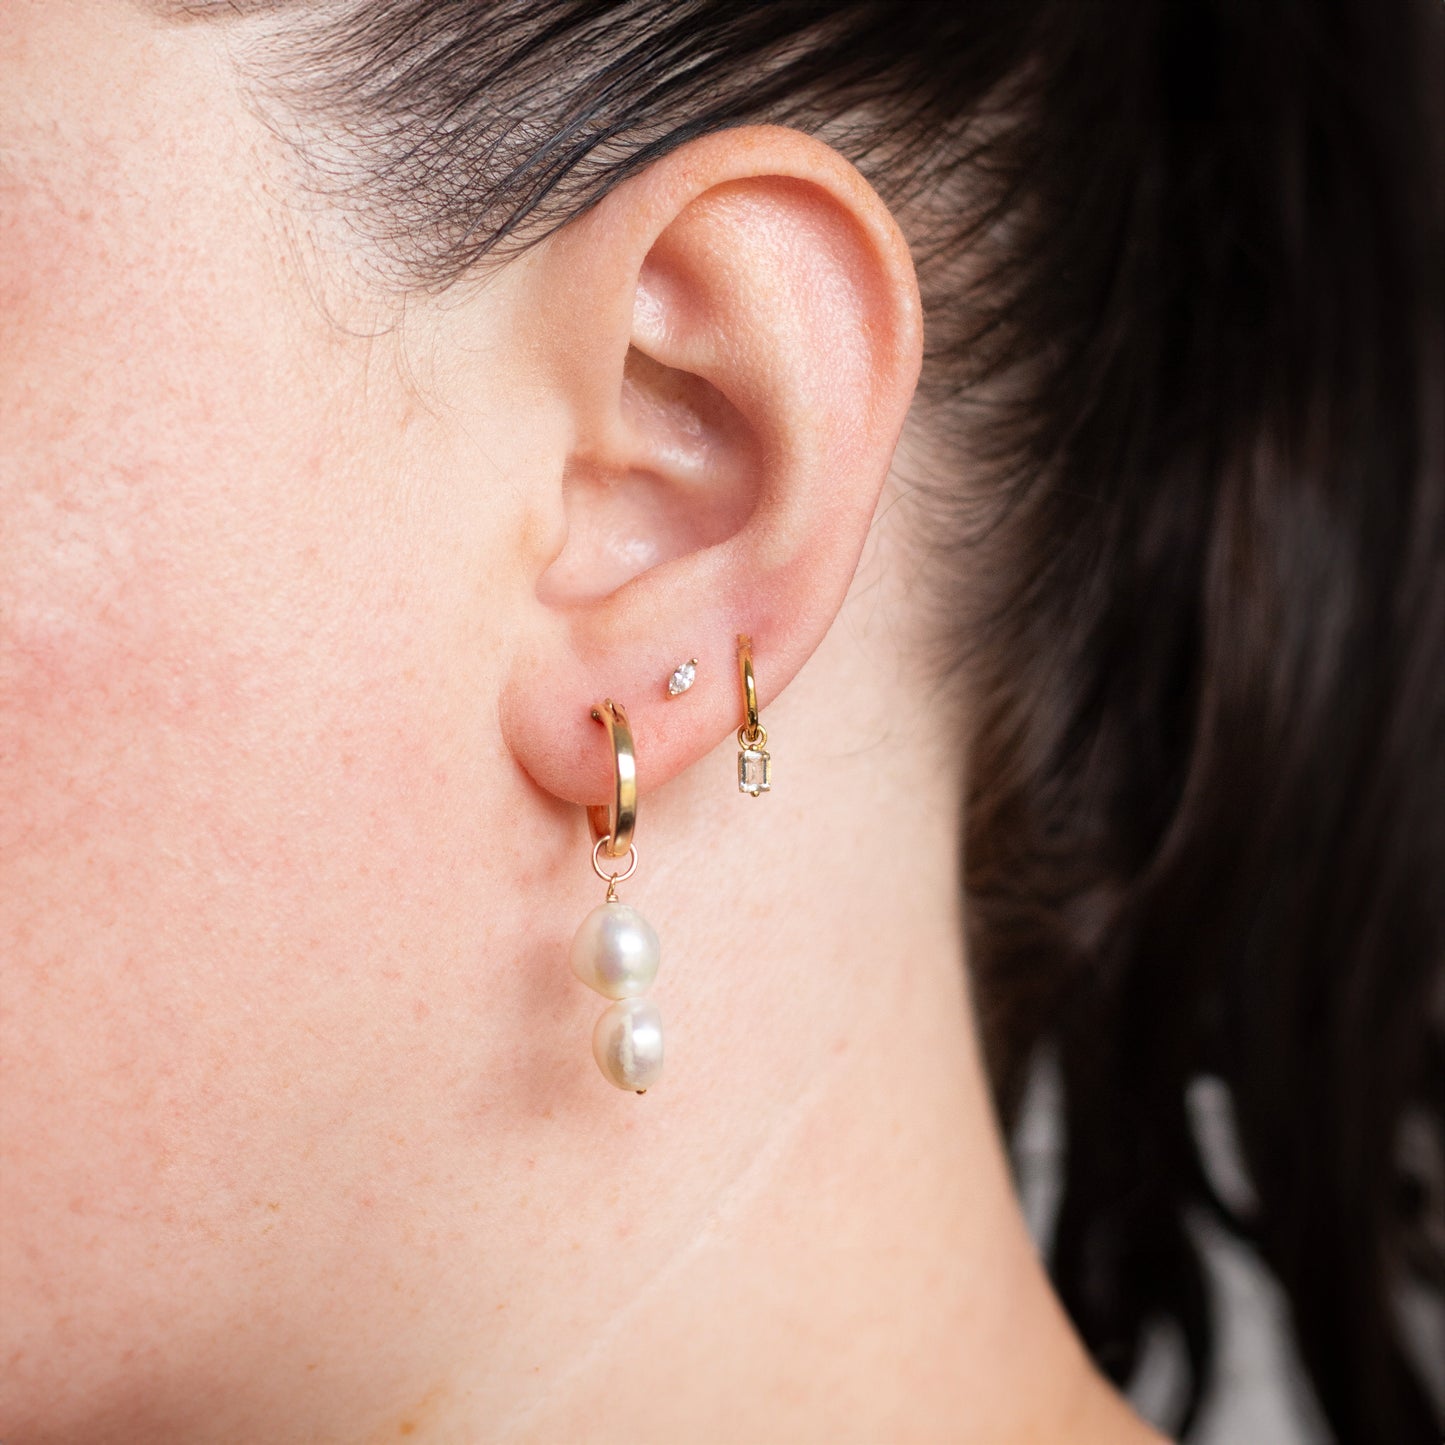 Jane wearing her Gia Pearl Hoops in gold filled with a marques stud and white cubic zirconia charm earring